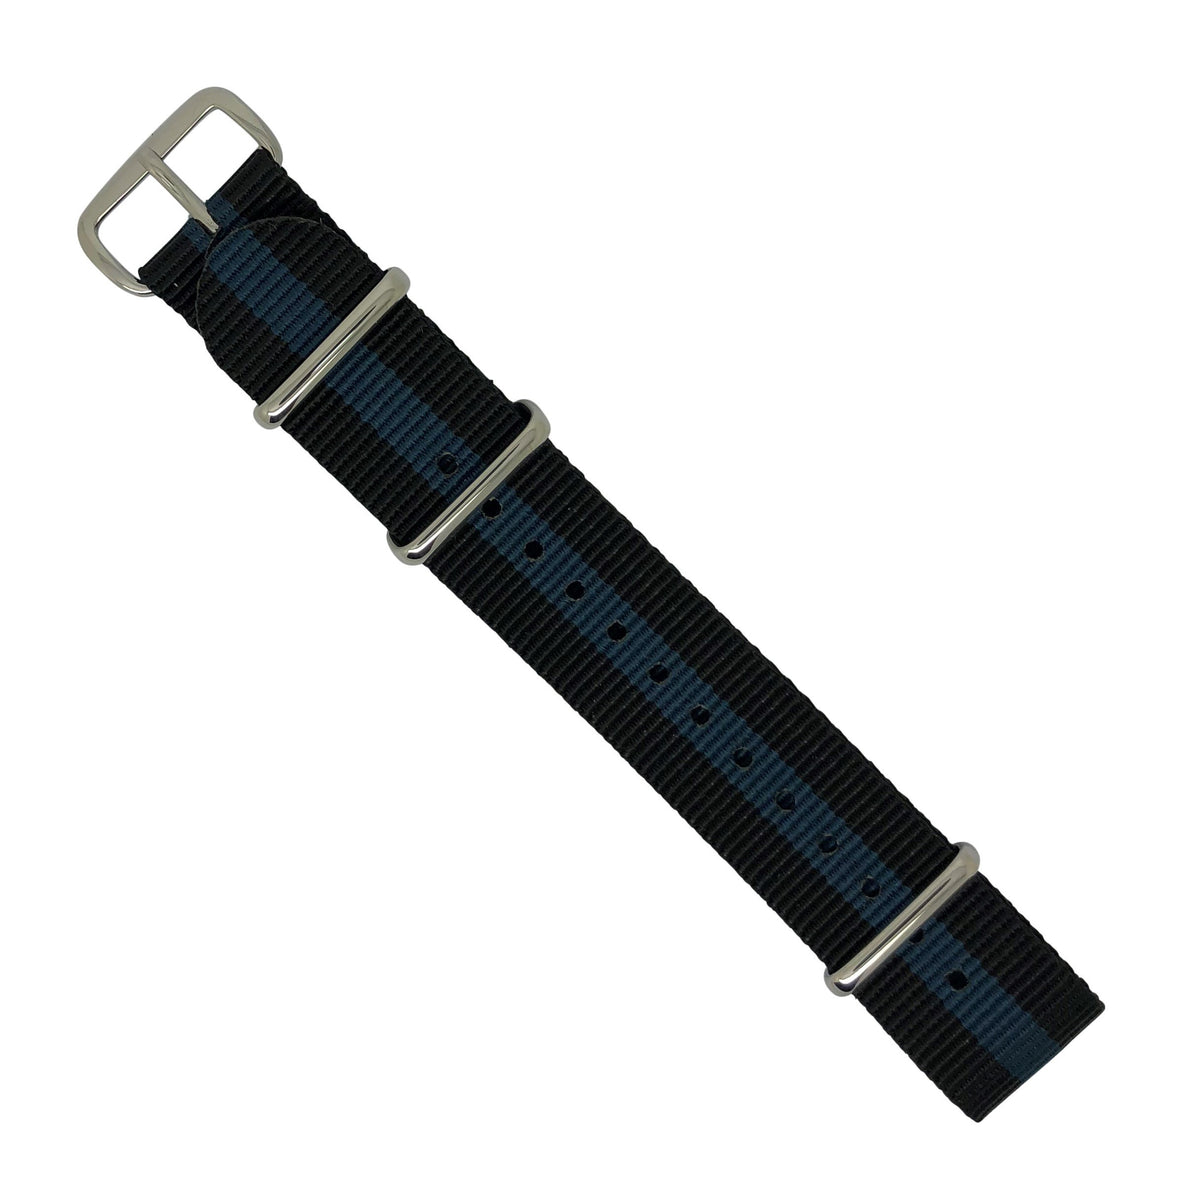 Premium Nato Strap in Black Blue with Polished Silver Buckle (20mm) - Nomadstore Singapore